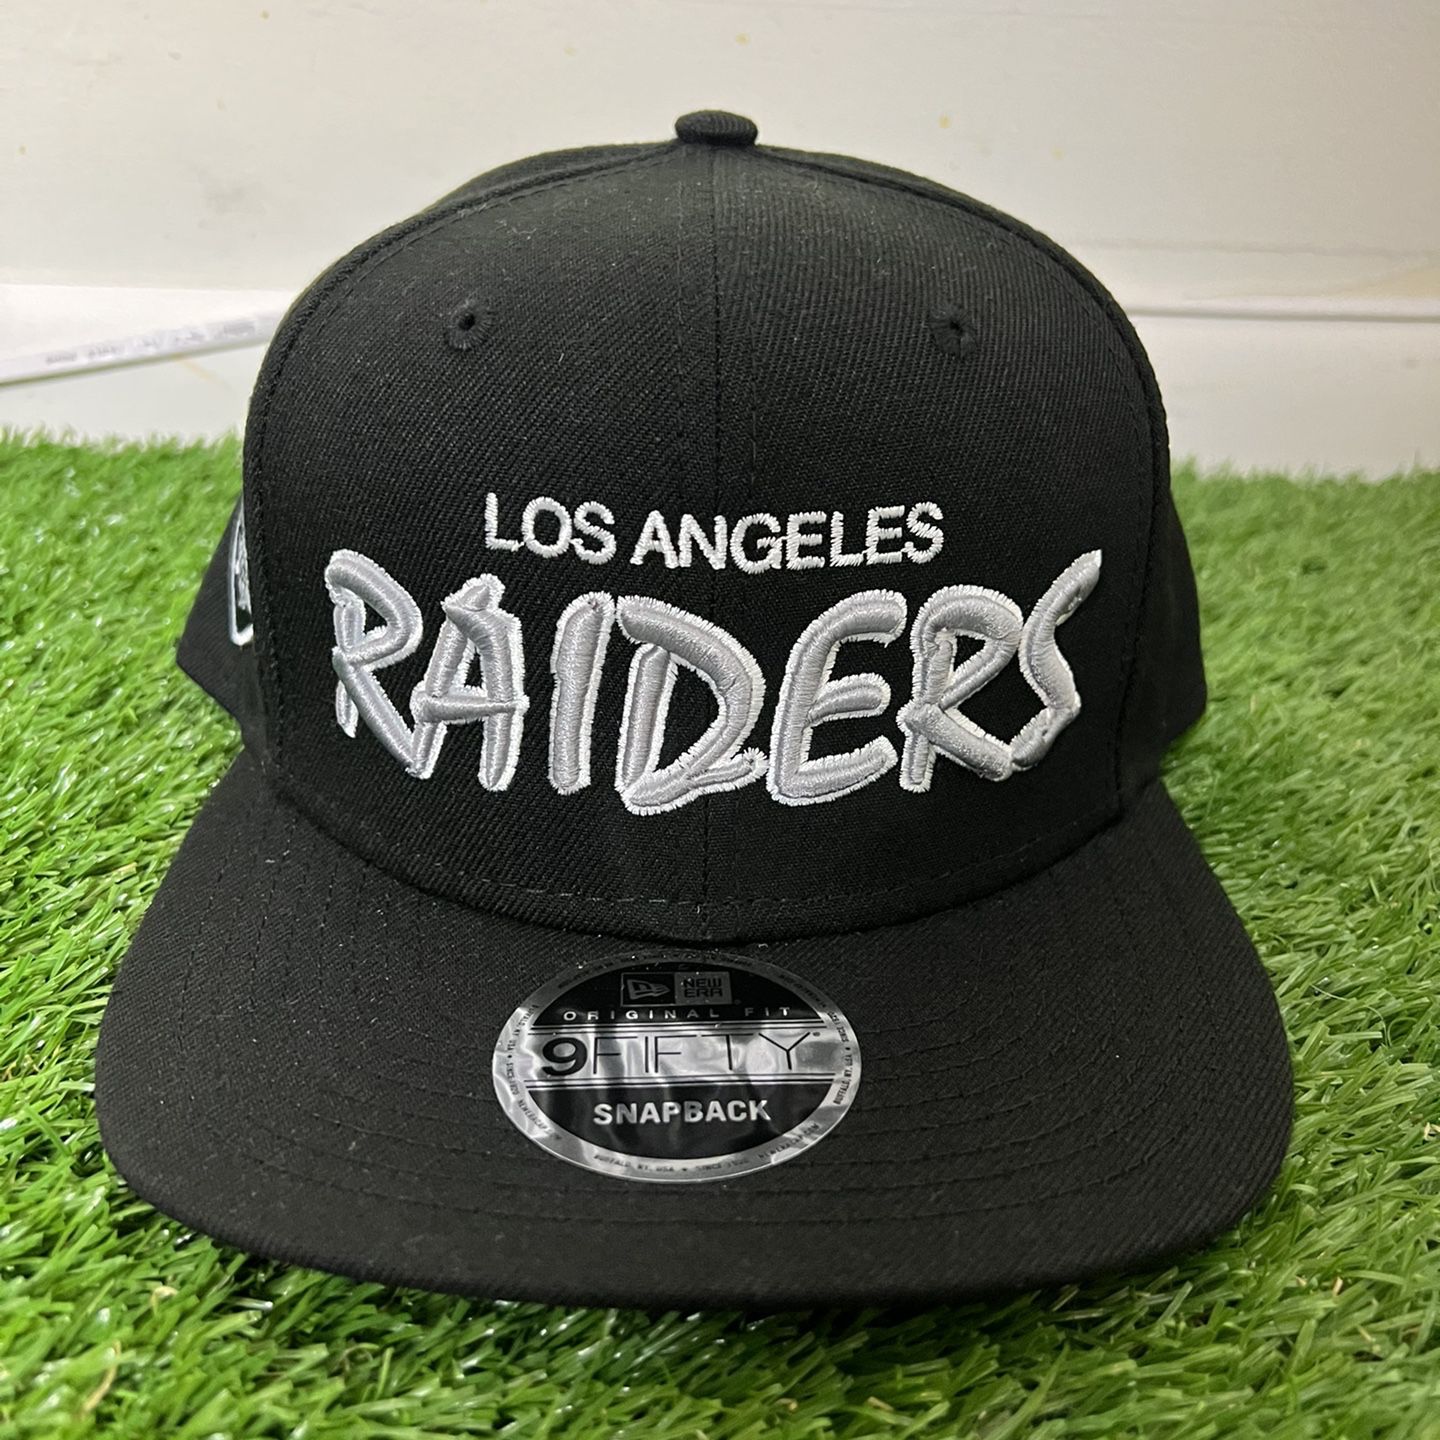 New Era 9fifty Los Angeles Raiders x NWA SnapBack Hat for Sale in  Montclair, CA - OfferUp